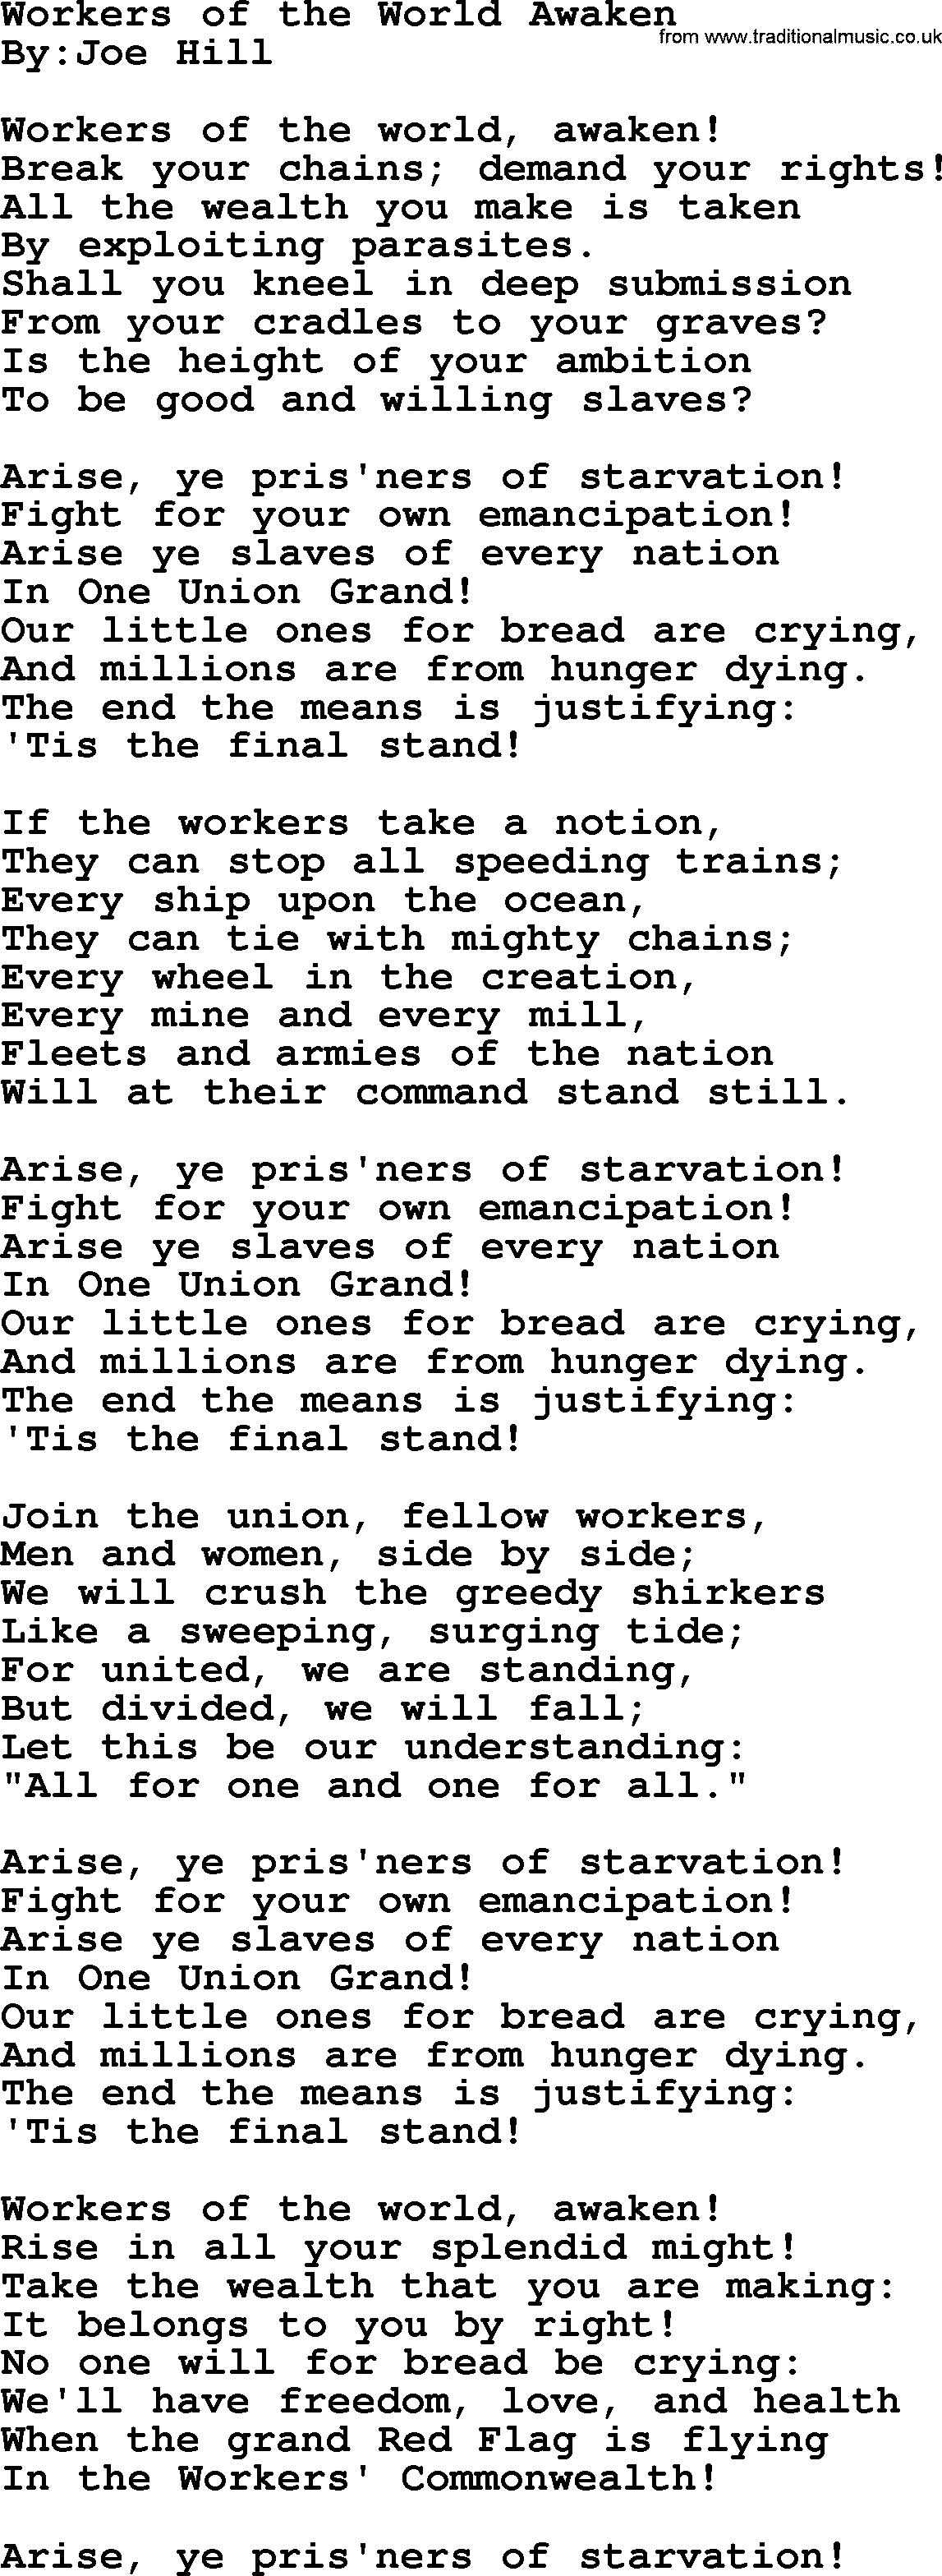 Political, Solidarity, Workers or Union song: Workers Of The World Awaken, lyrics